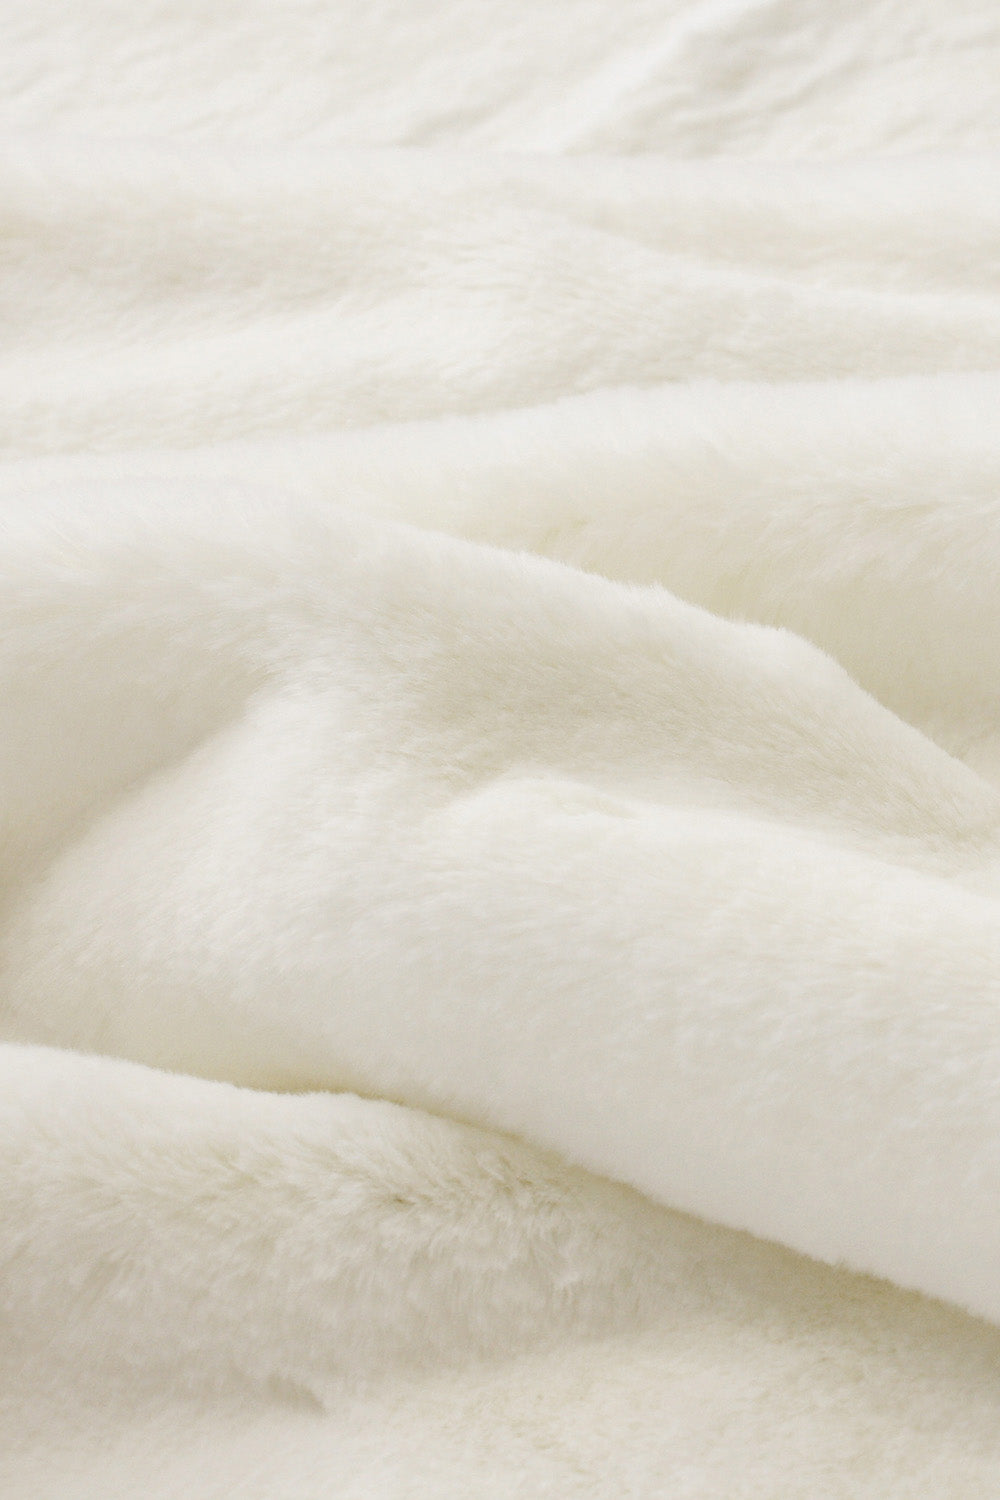 Luxury faux fur throw Polar Bear in pure white from Heirloom.  These are the best fake fur throws, super soft for NZ interior design